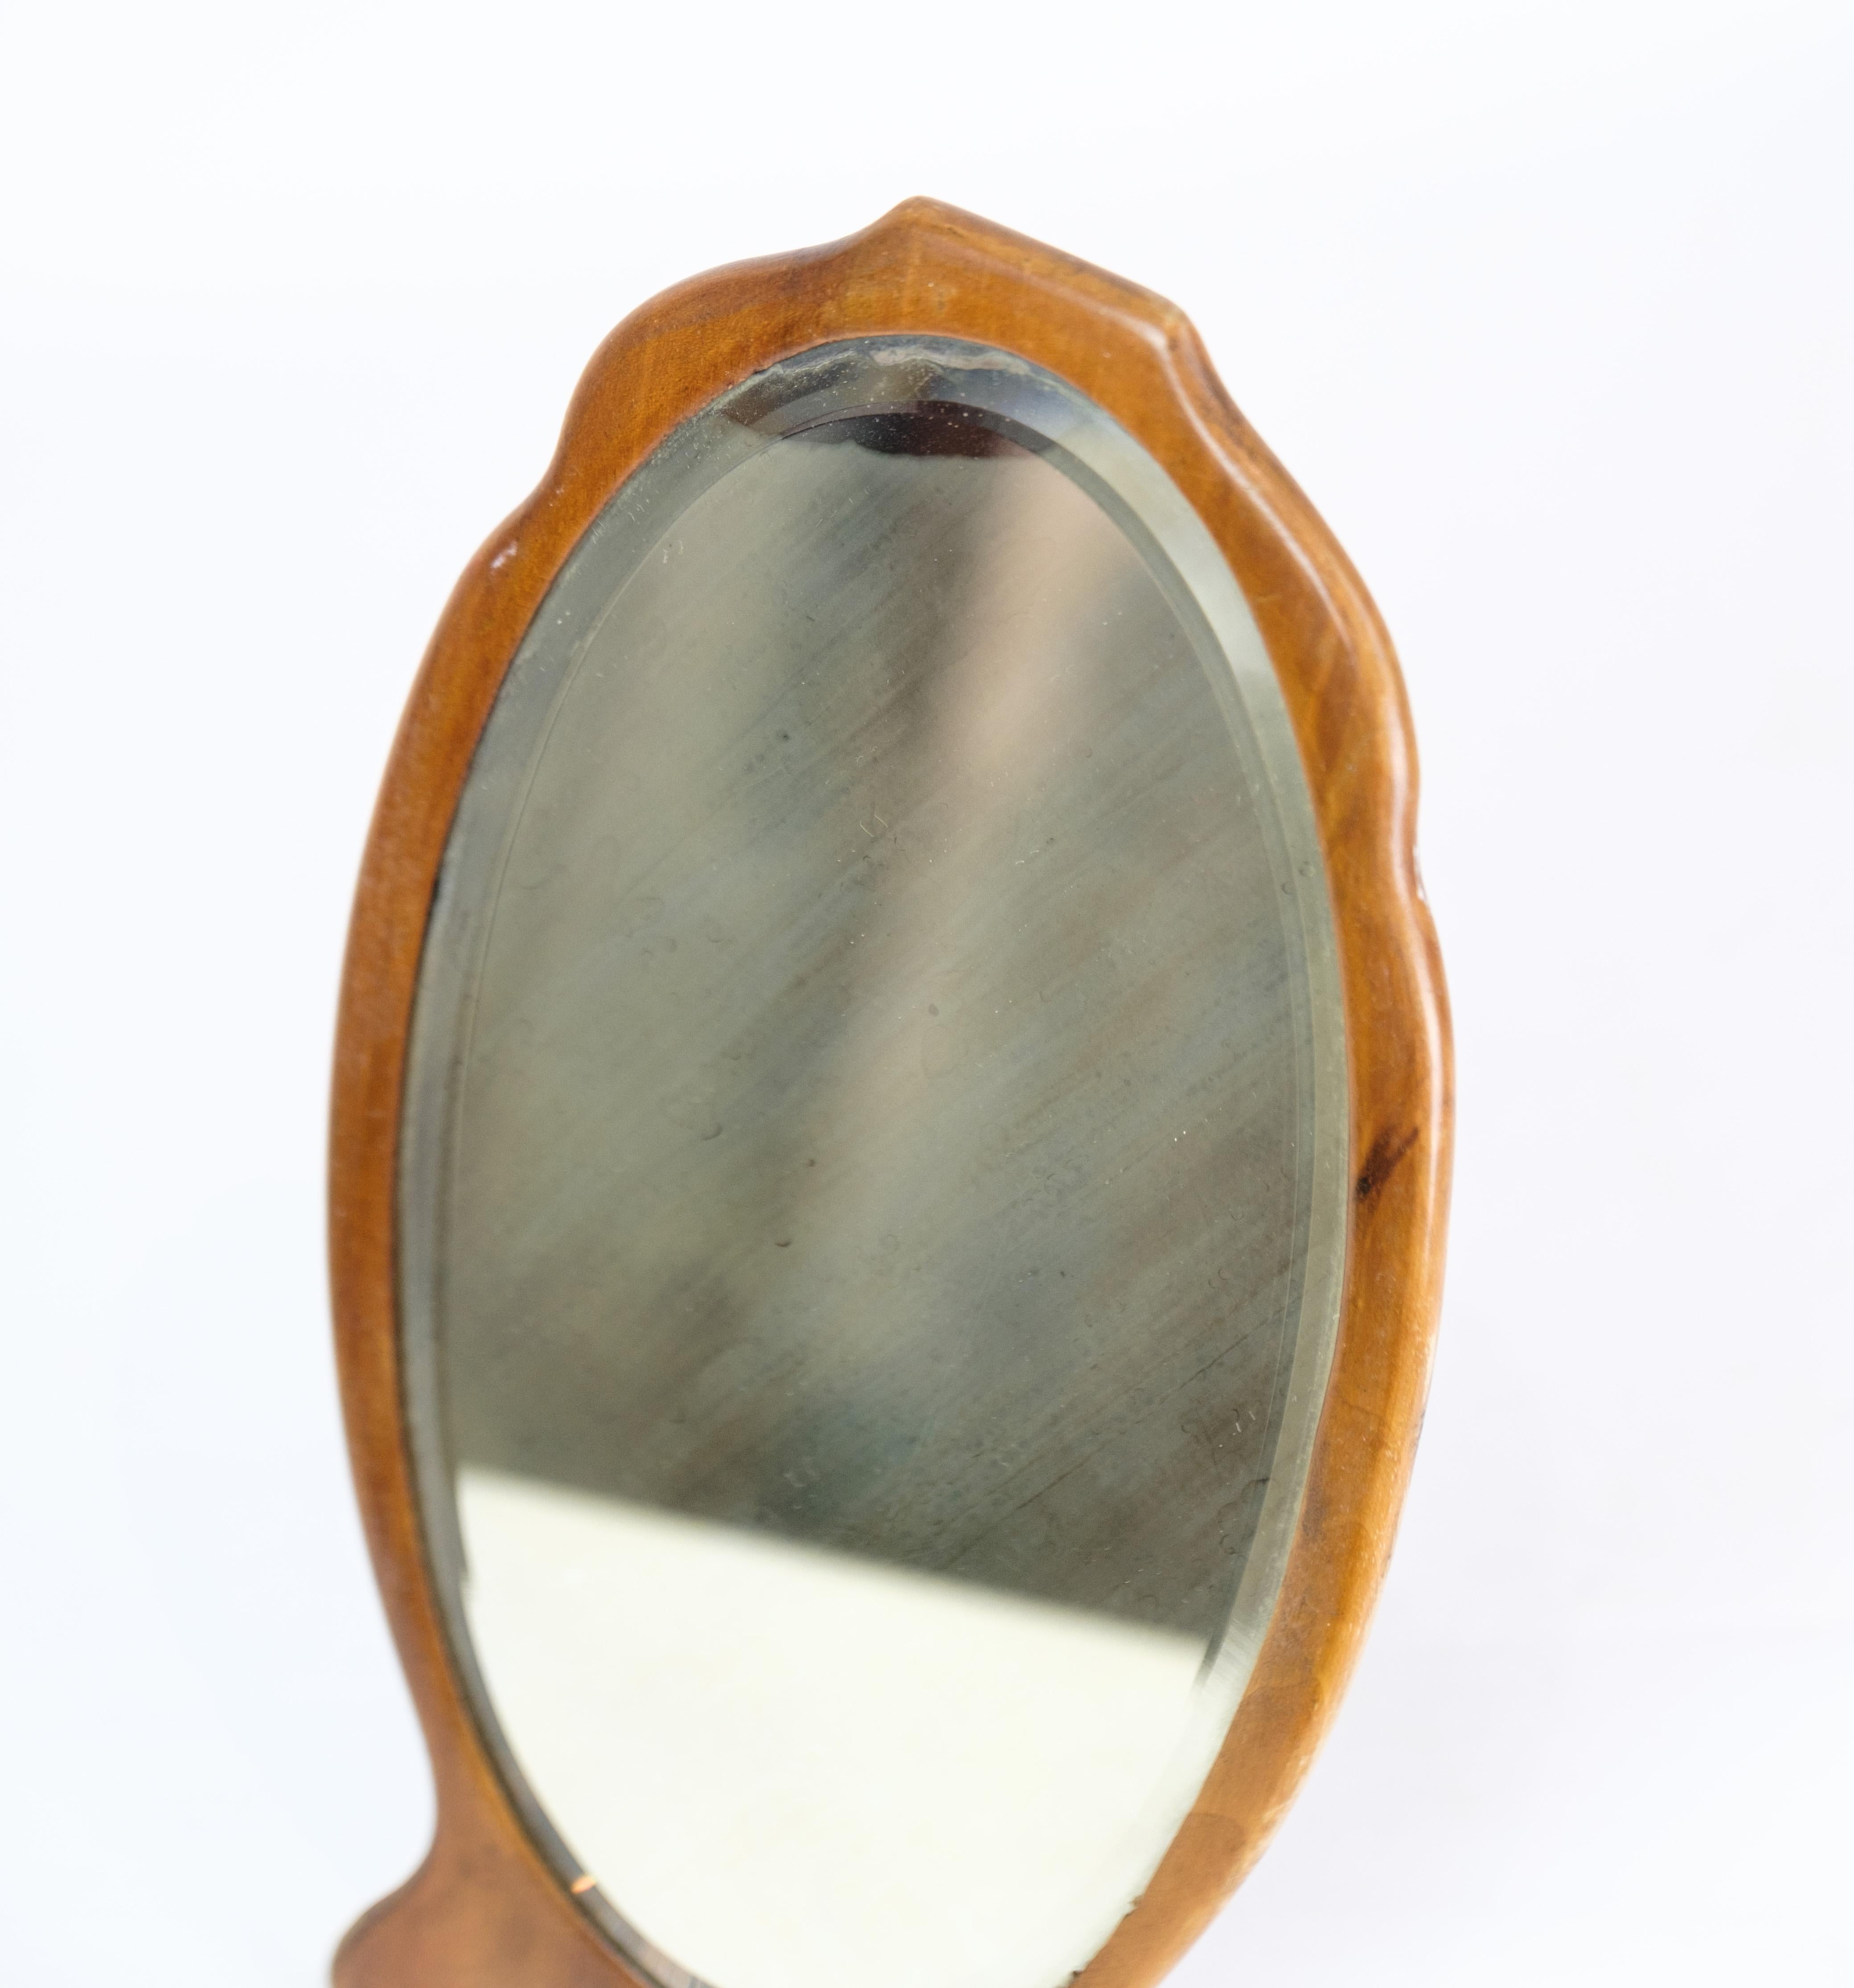 Small table mirror in walnut wood with small metal foot from around the 1880s.
Dimensions in cm: H:30 W:15.5.